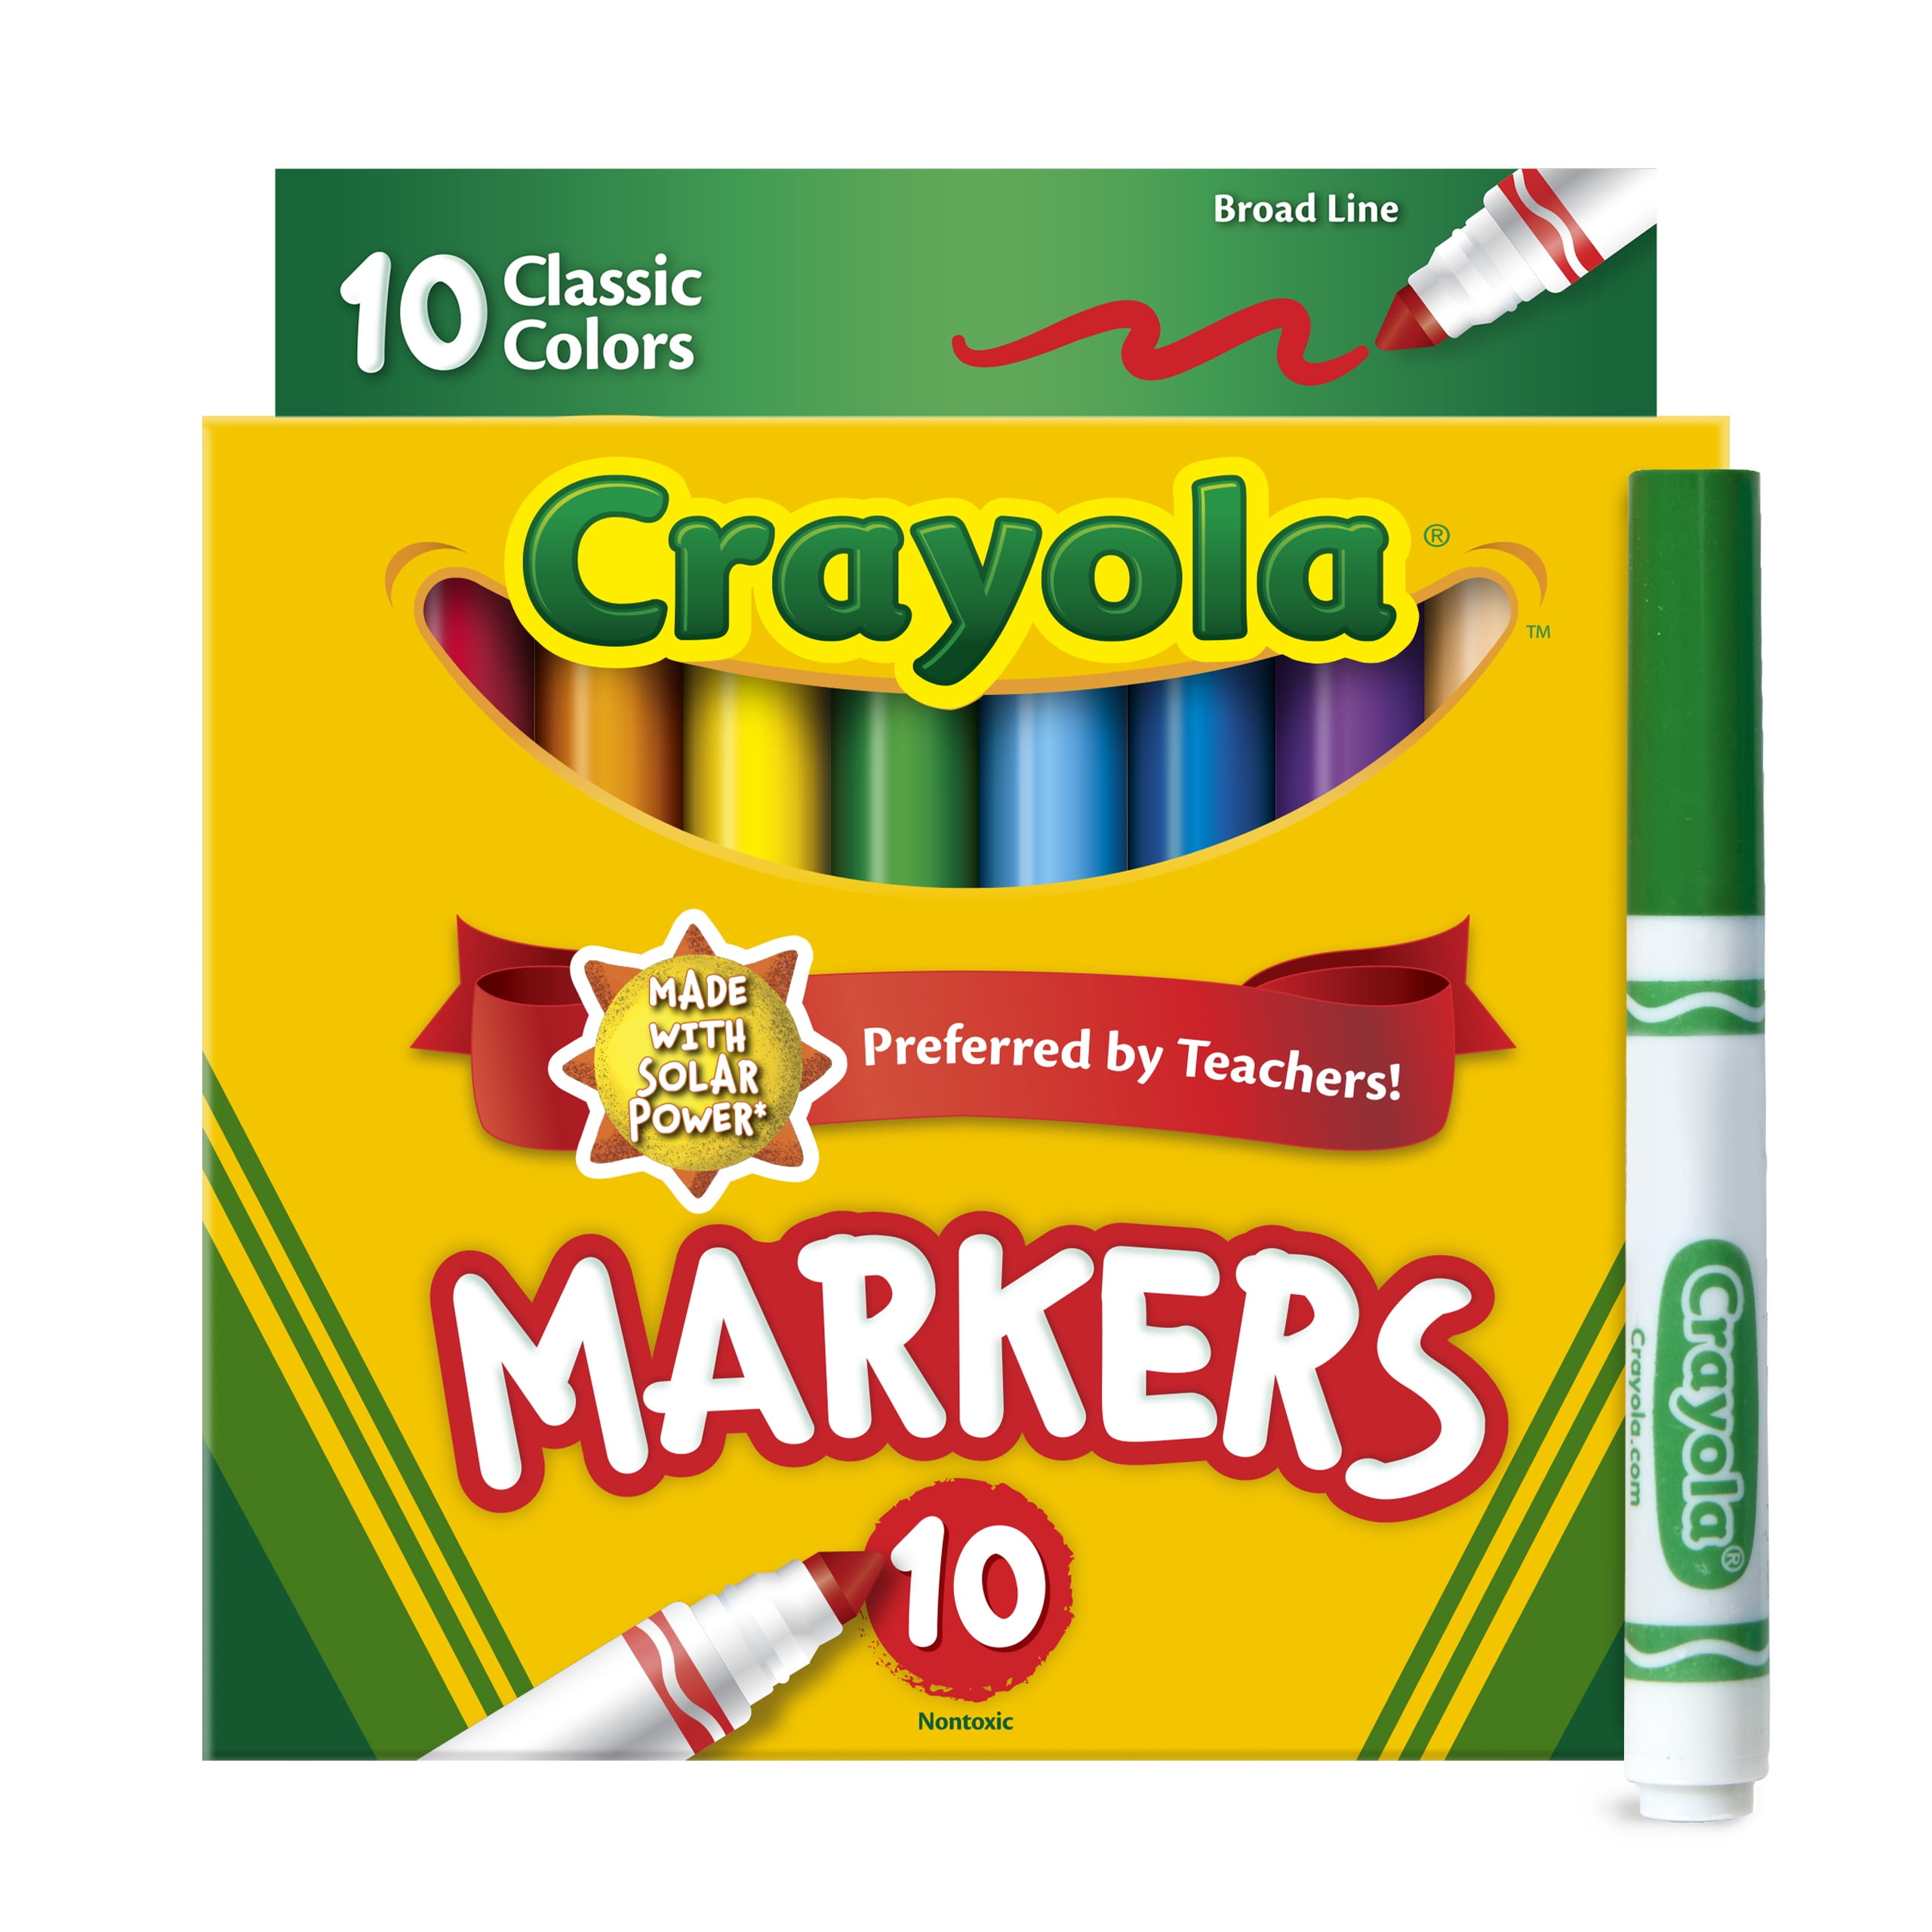 Crayola Classic Broad Line Markers, Art Supplies, Back to School Supplies,  10 Ct